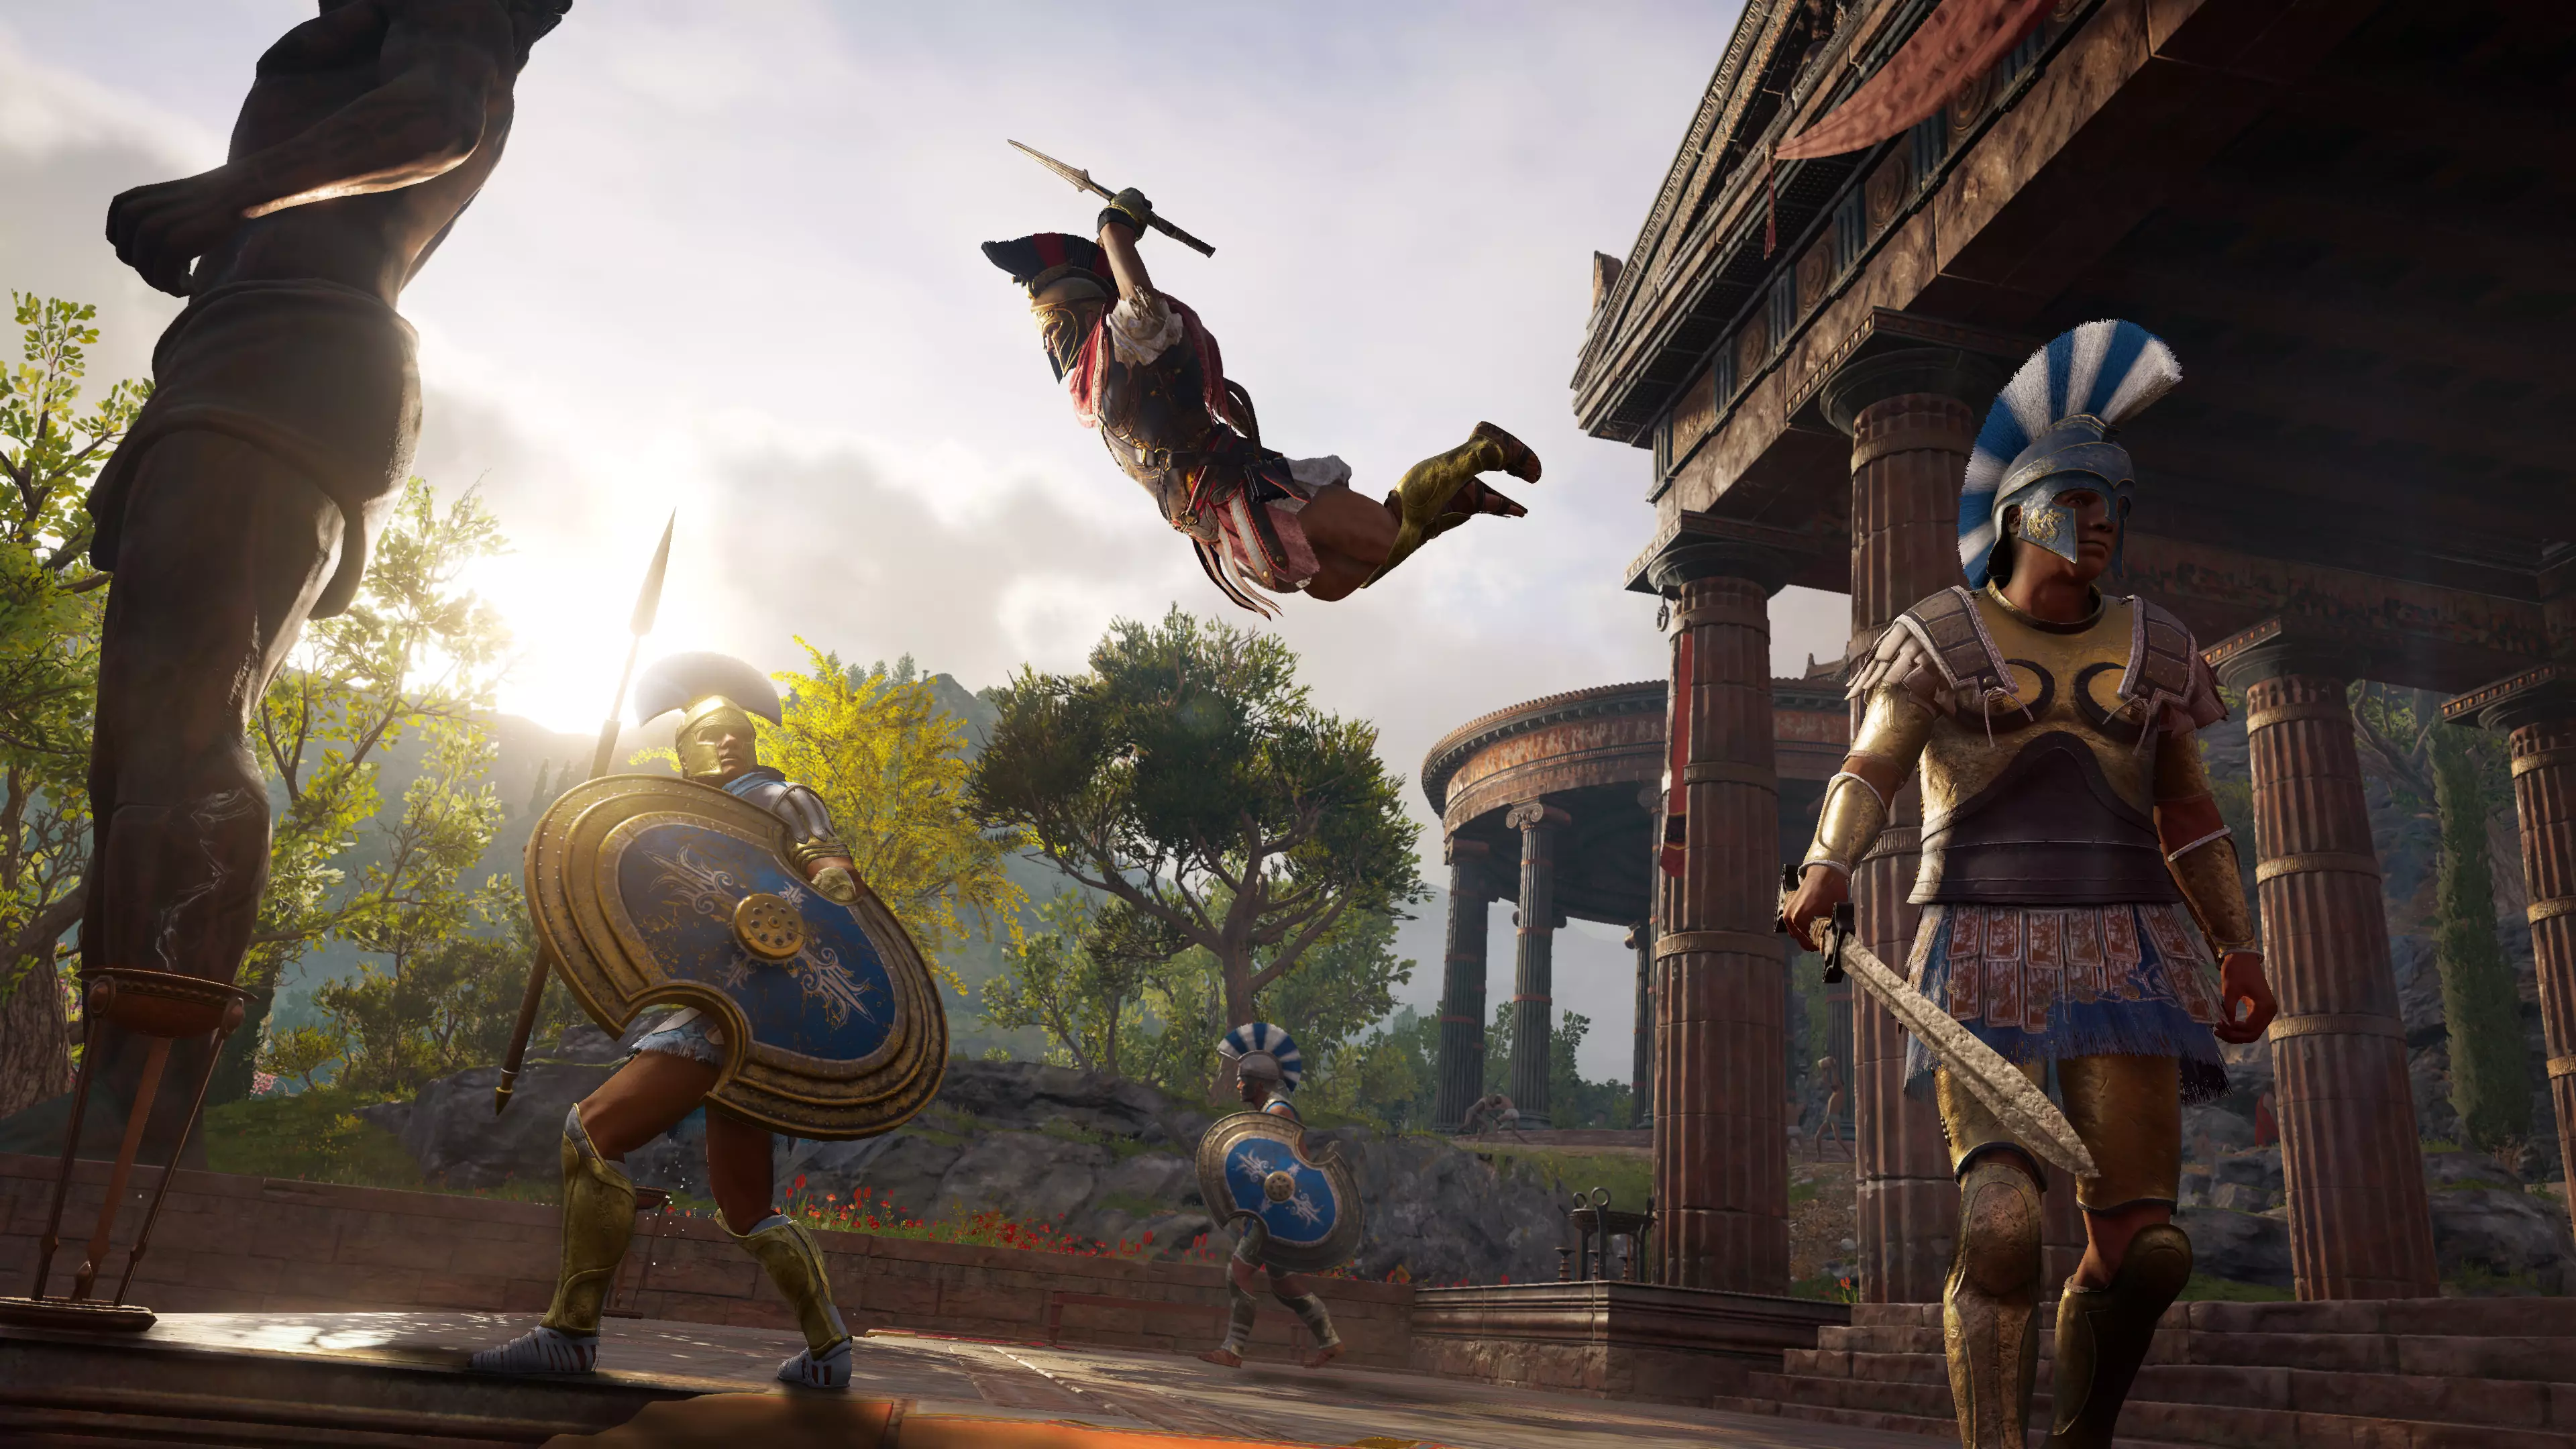 CREDIT: Assassin's Creed Odyssey